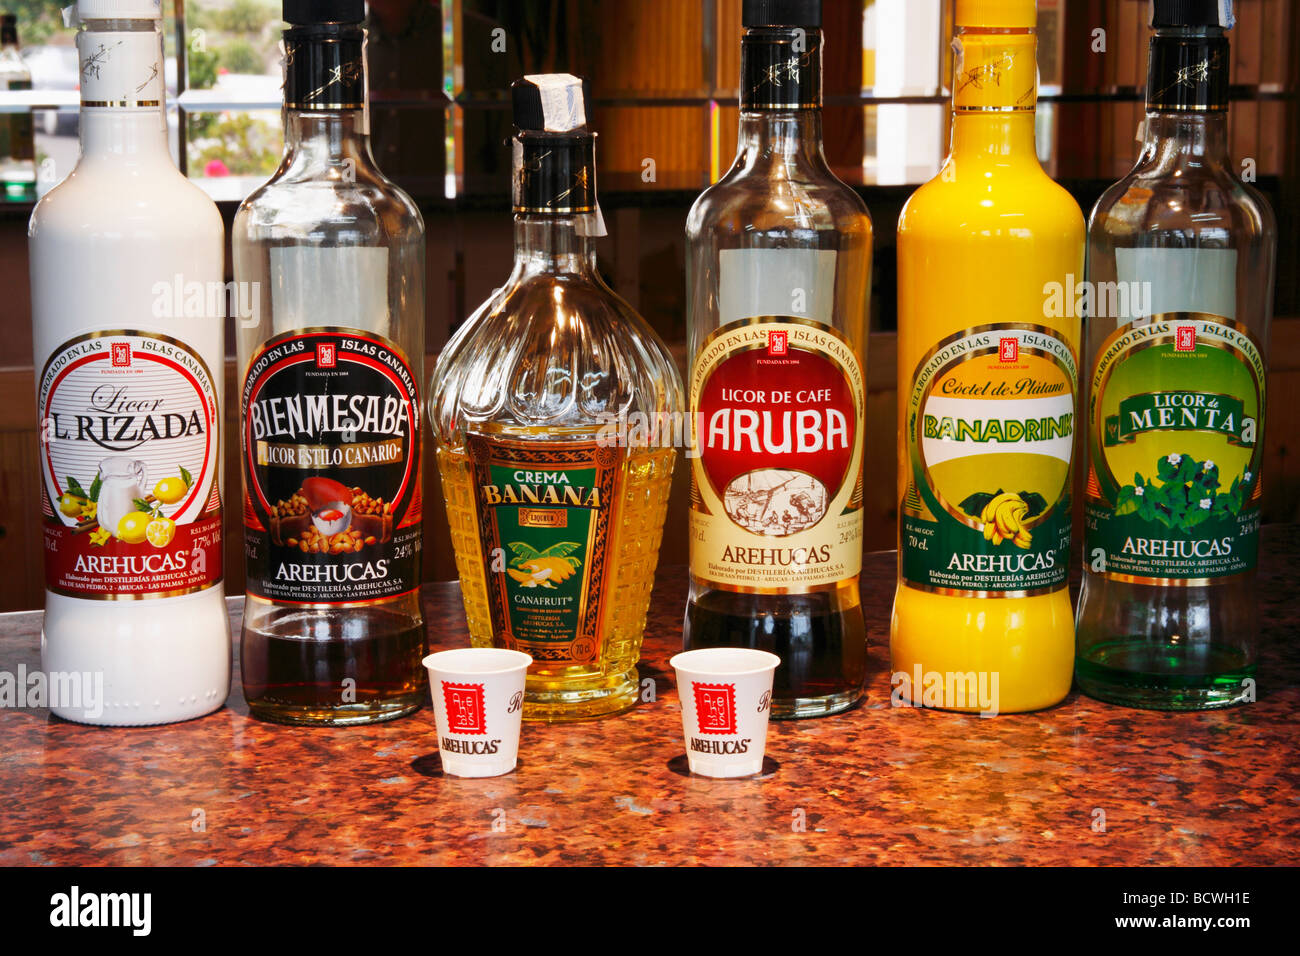 Bottles of rum based liqueurs in Arehucas Rum distillery in Arucas on Gran Canaria in the Canary Islands Stock Photo